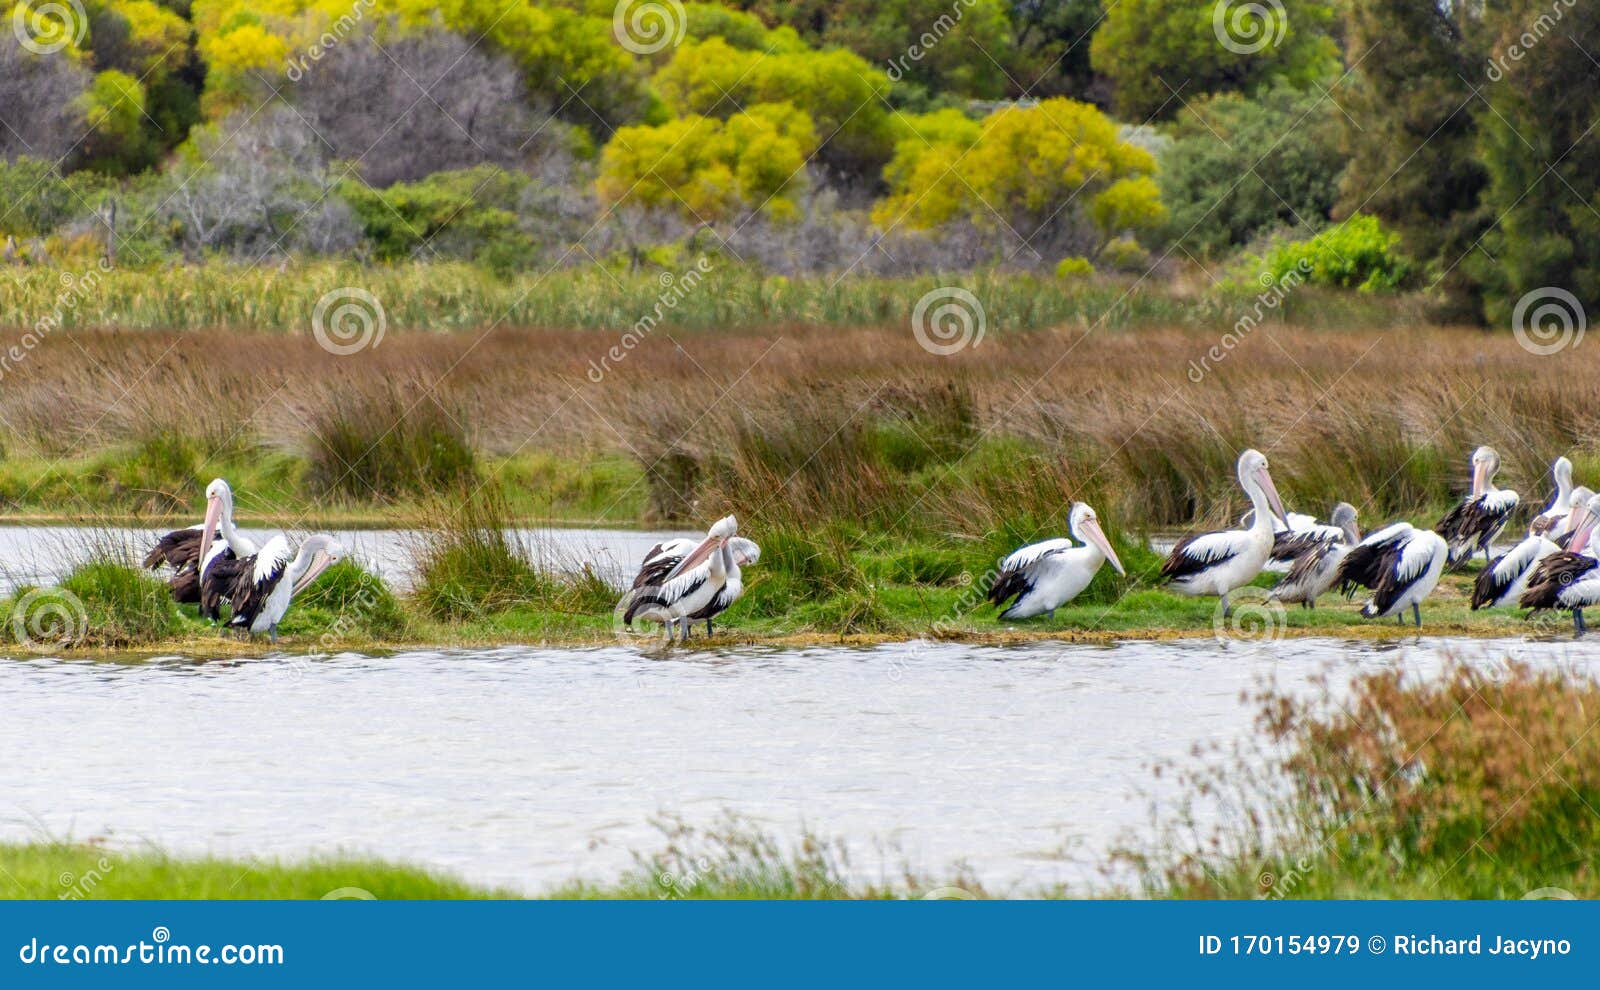 pelicans at lake richmond is an important ecosystem for thrombolites and waterbirds